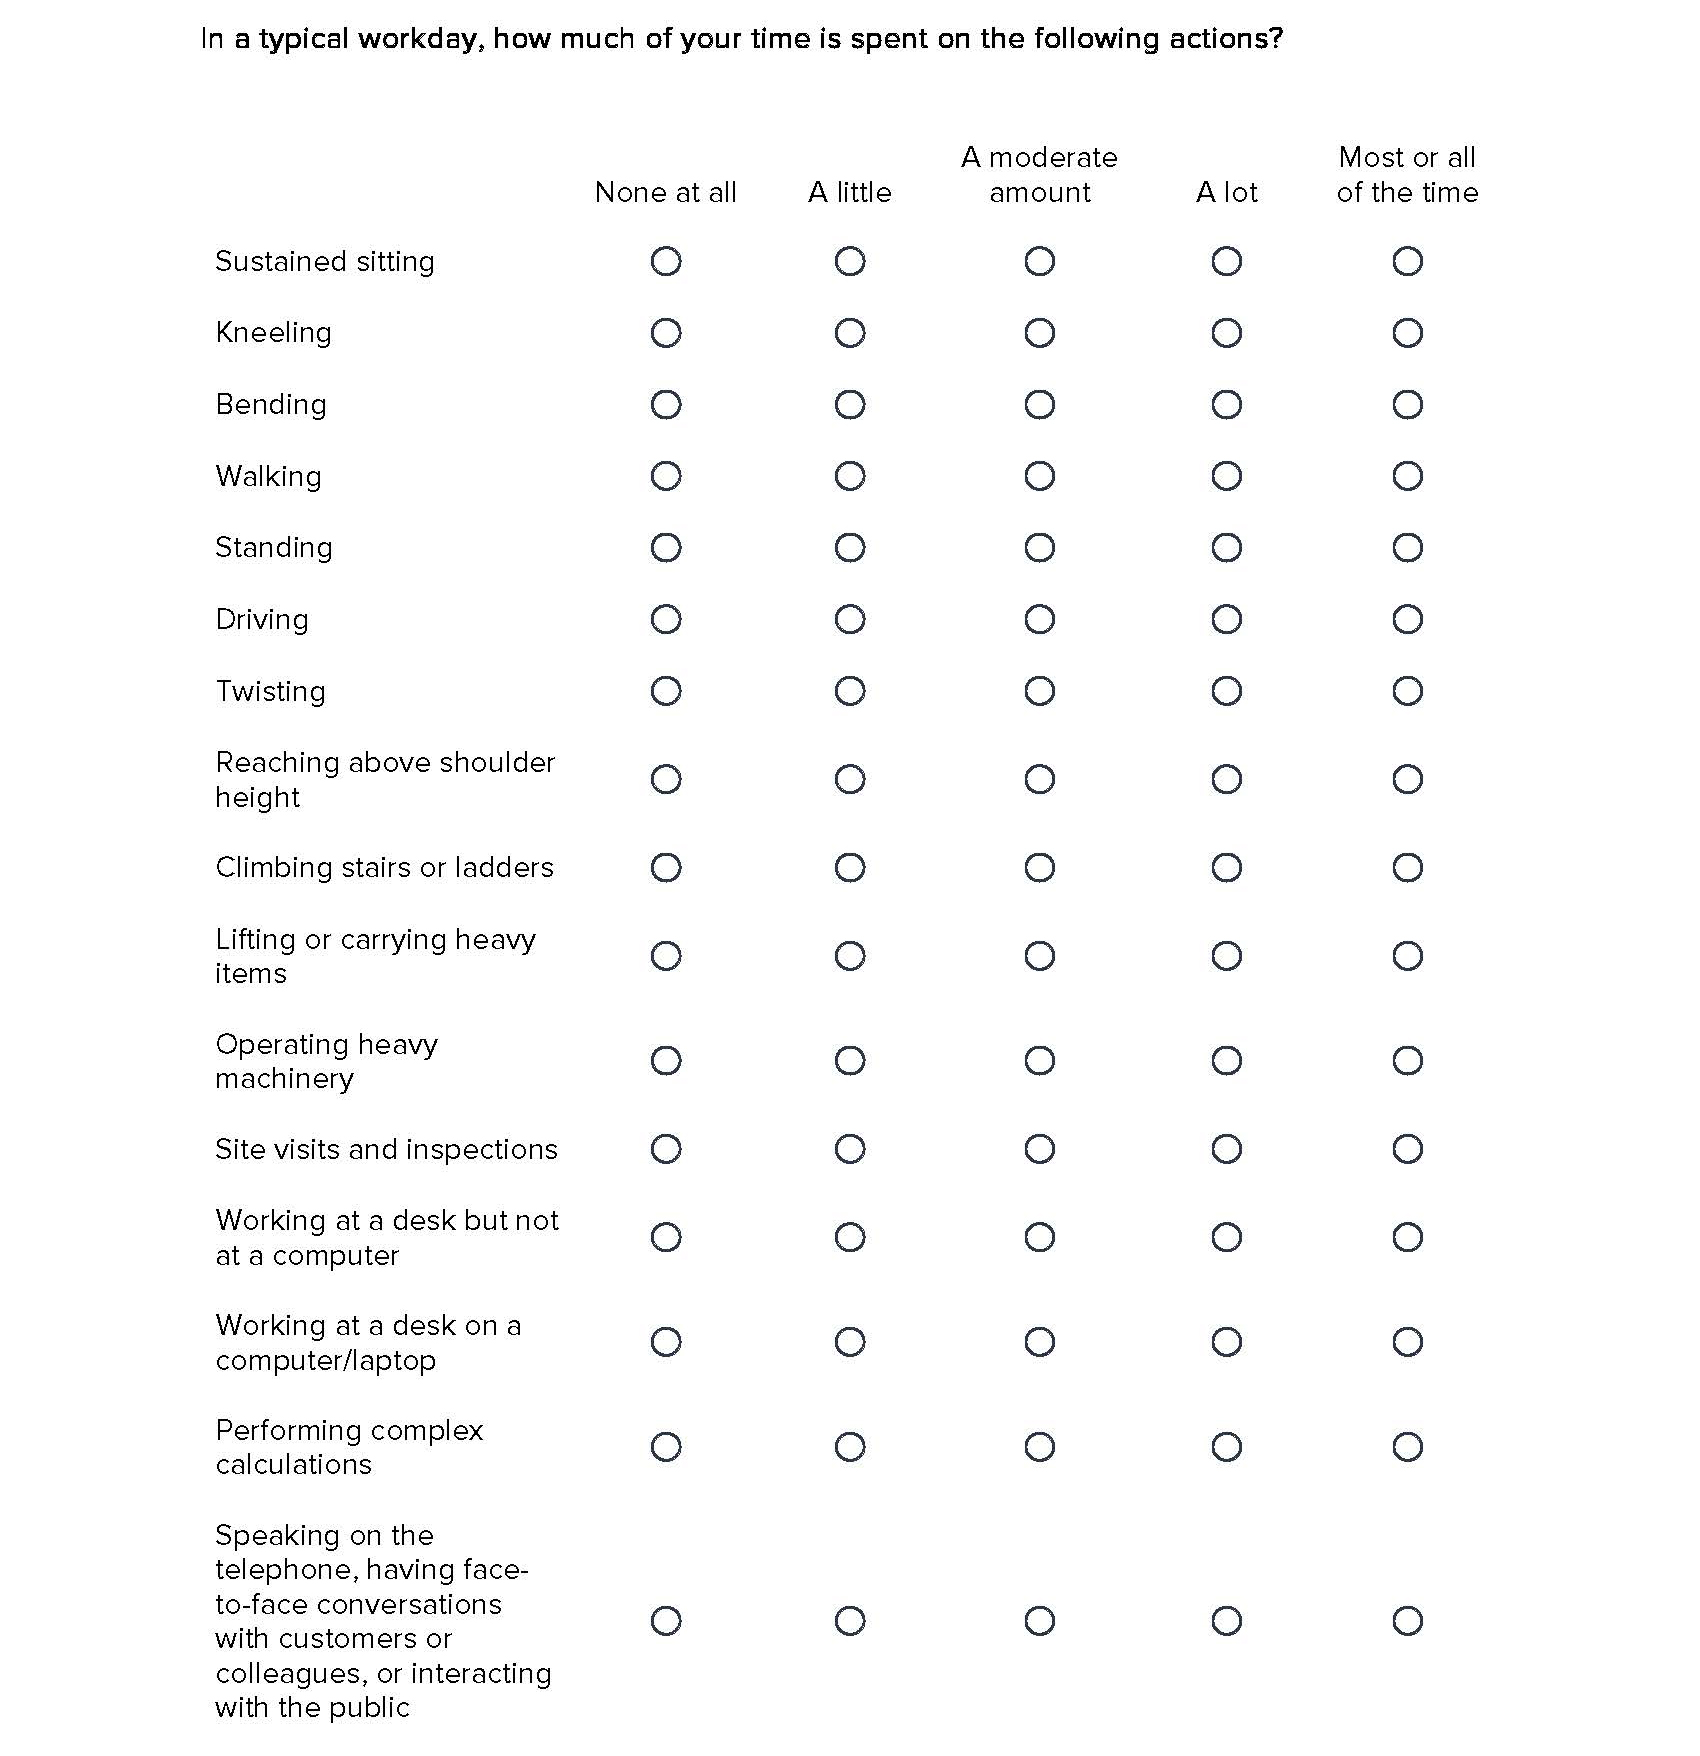 Sample questionnaire for what users do in a typical workday